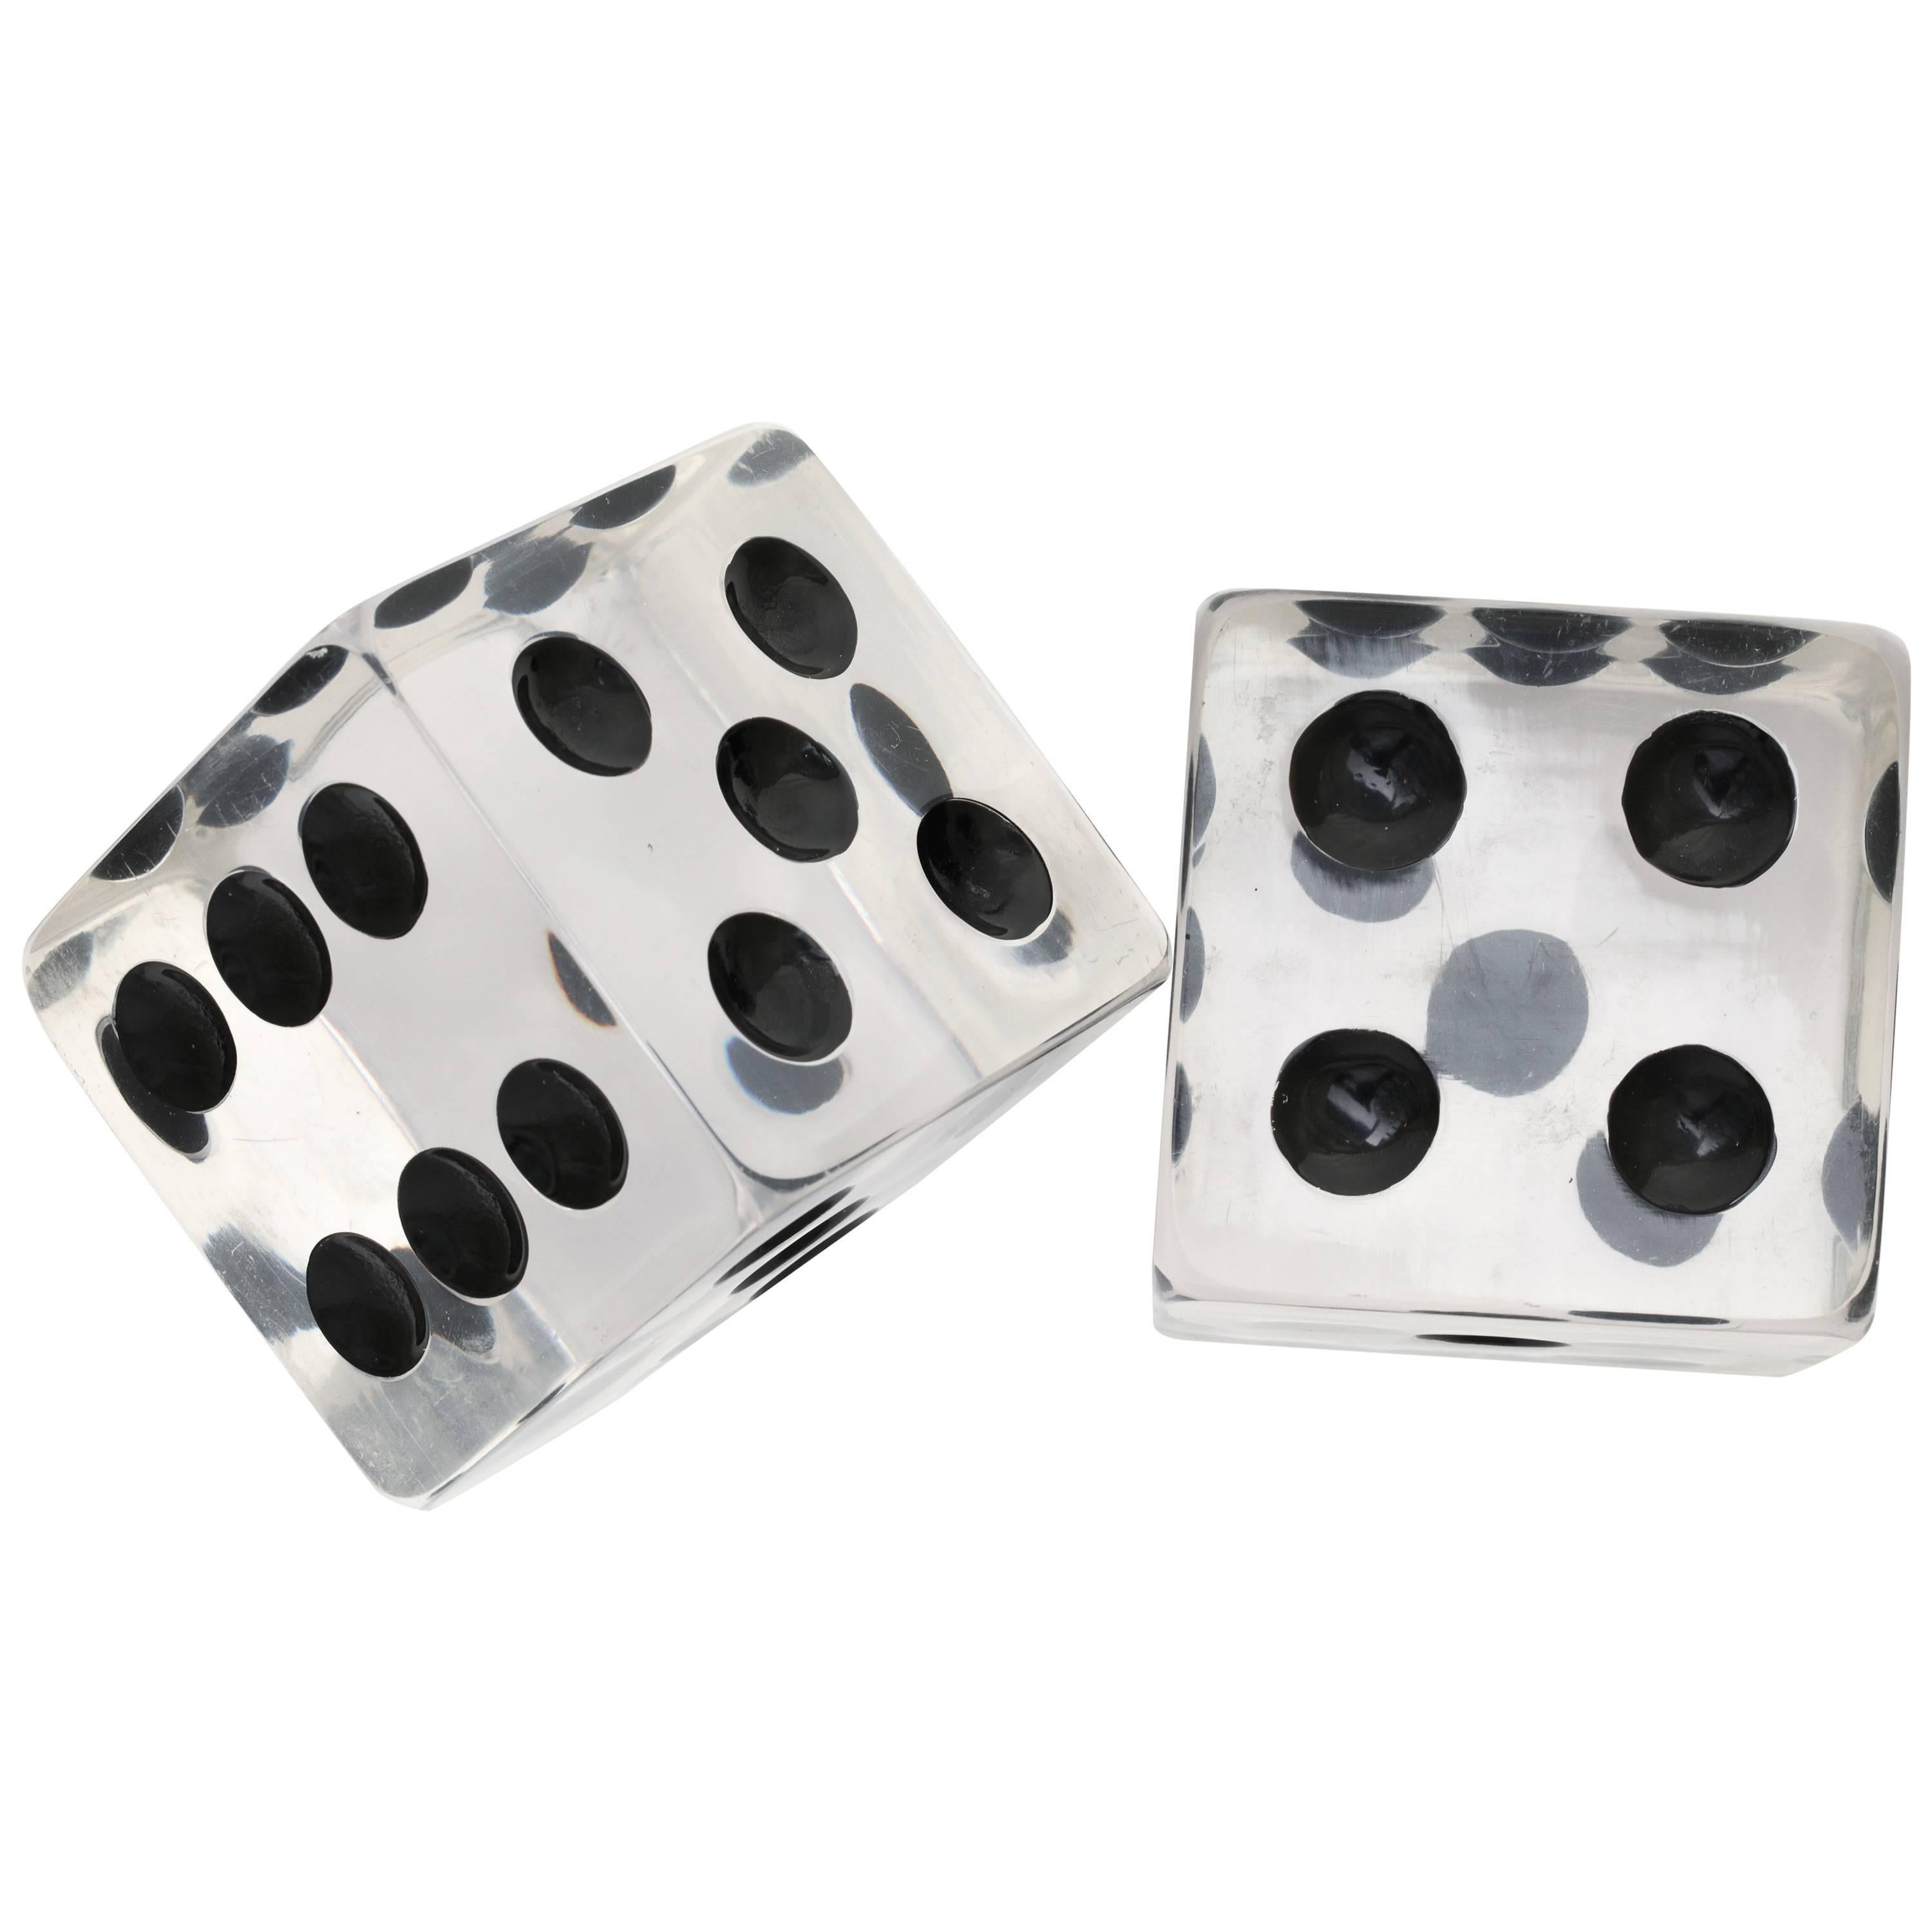 Pair of Dice Paperweight 1.5 inch With White Dots and Gift Box 